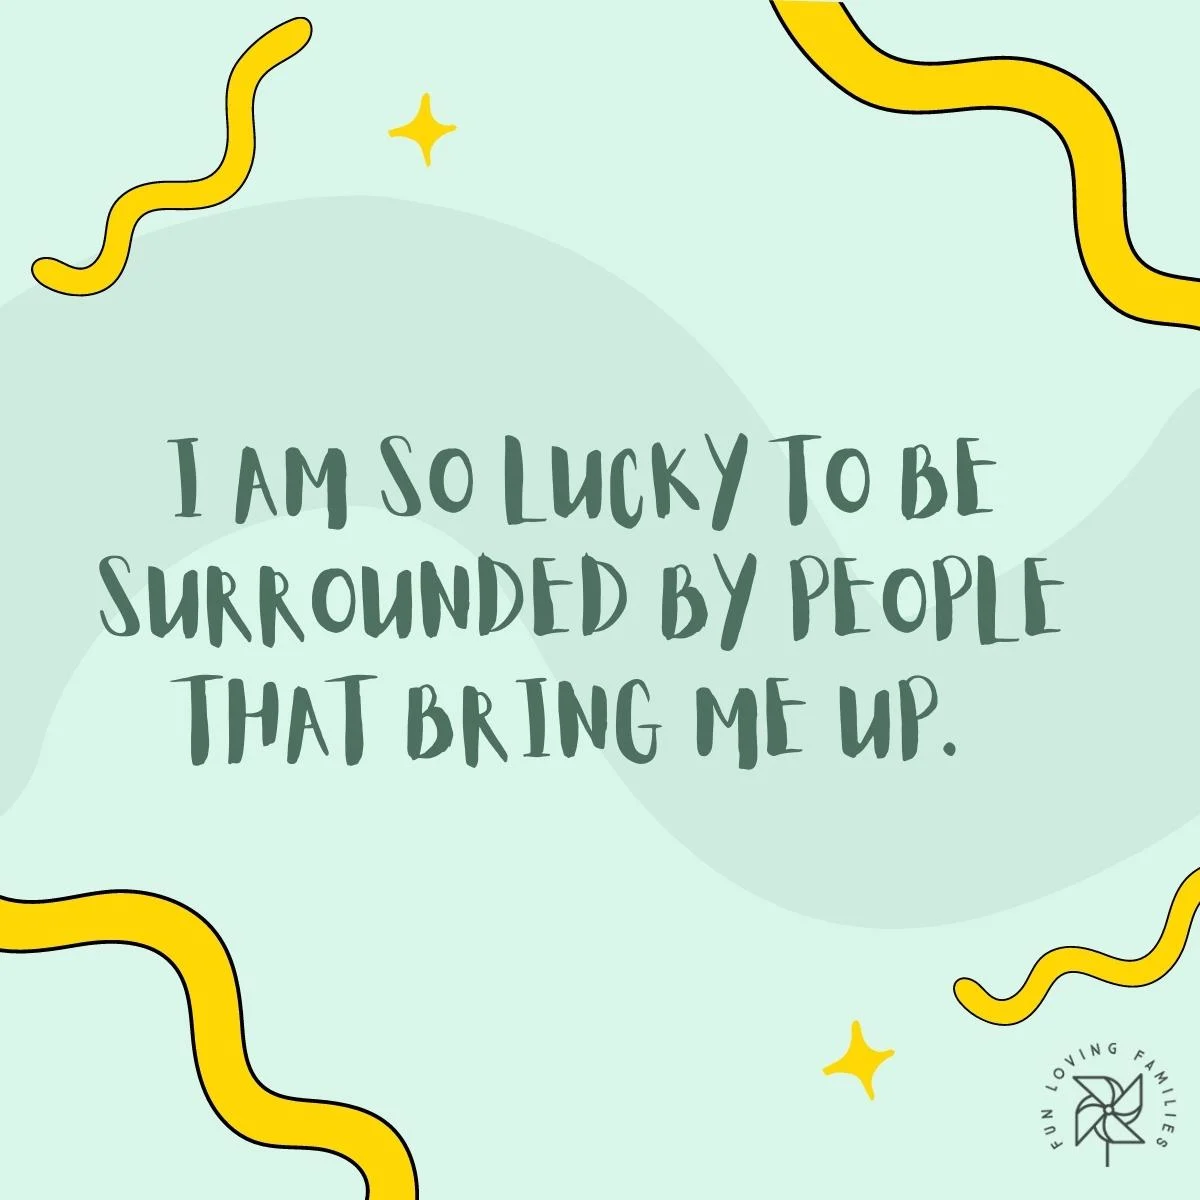 I am so lucky to be surrounded by people that bring me up affirmation